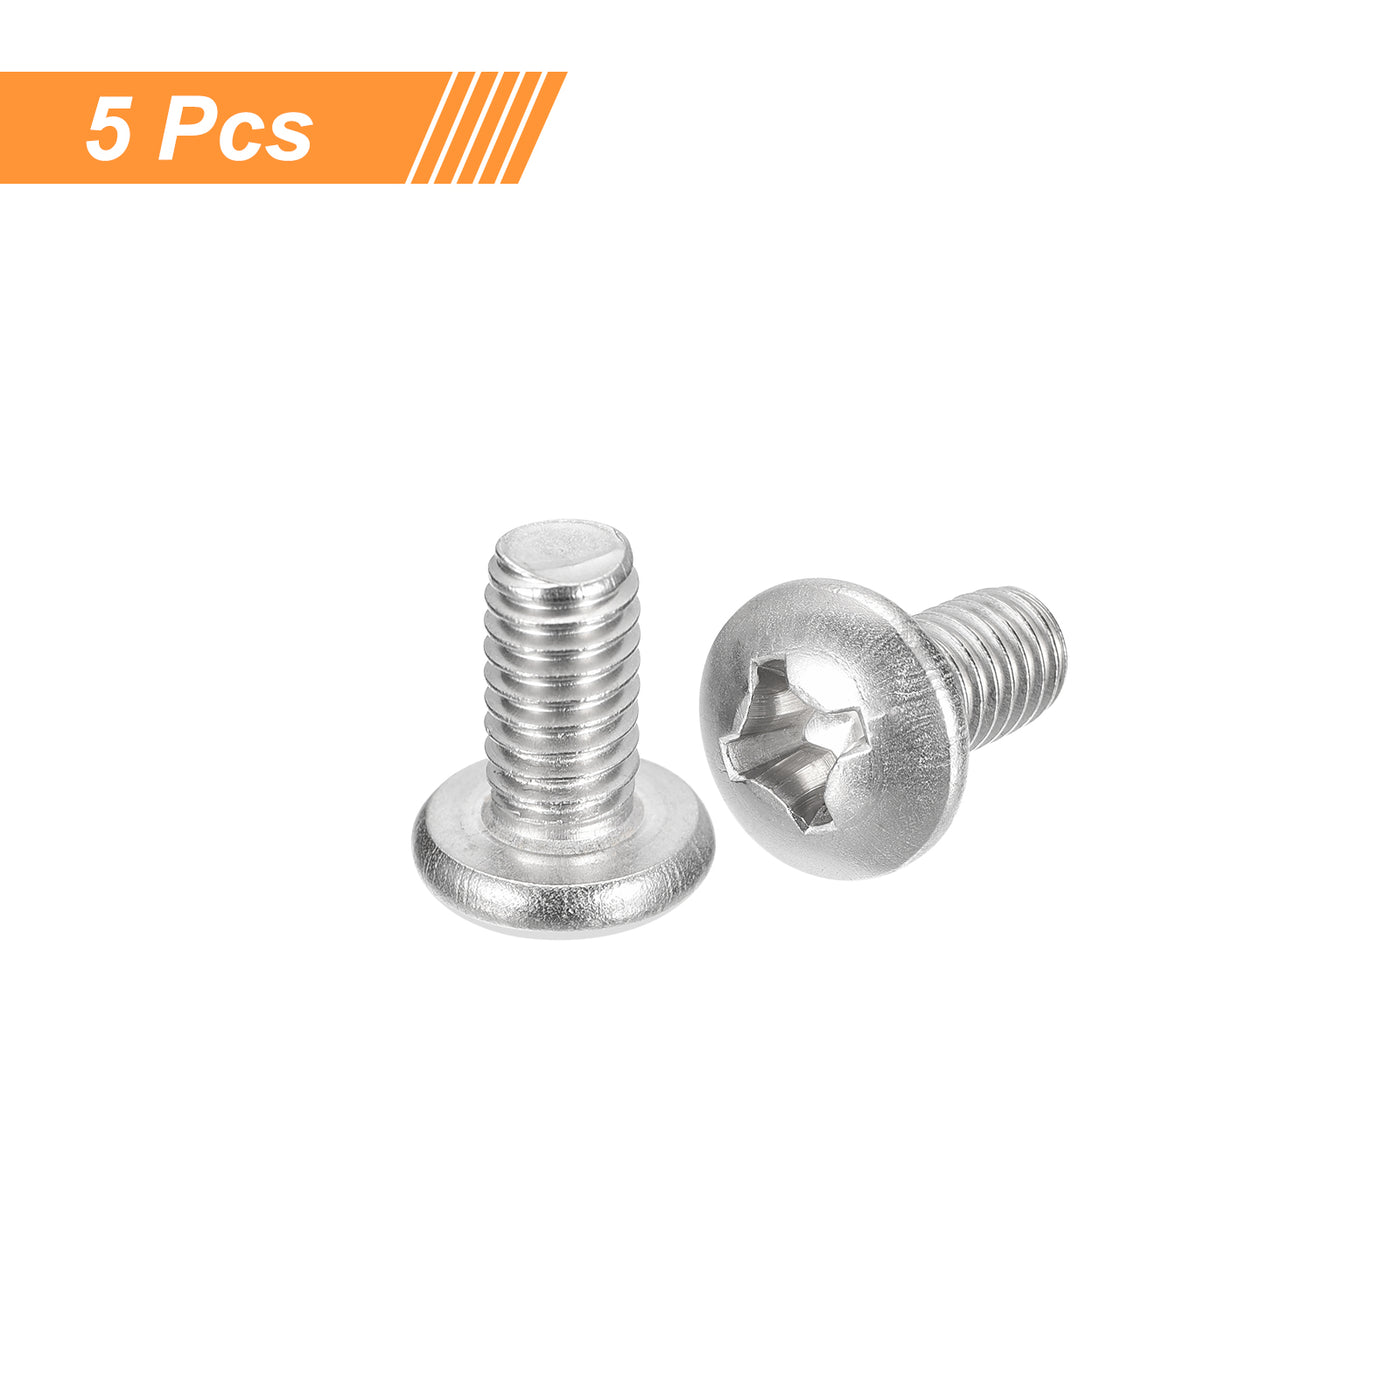 uxcell Uxcell 5/16-18x5/8" Pan Head Machine Screws, Stainless Steel 18-8 Screw, Pack of 5